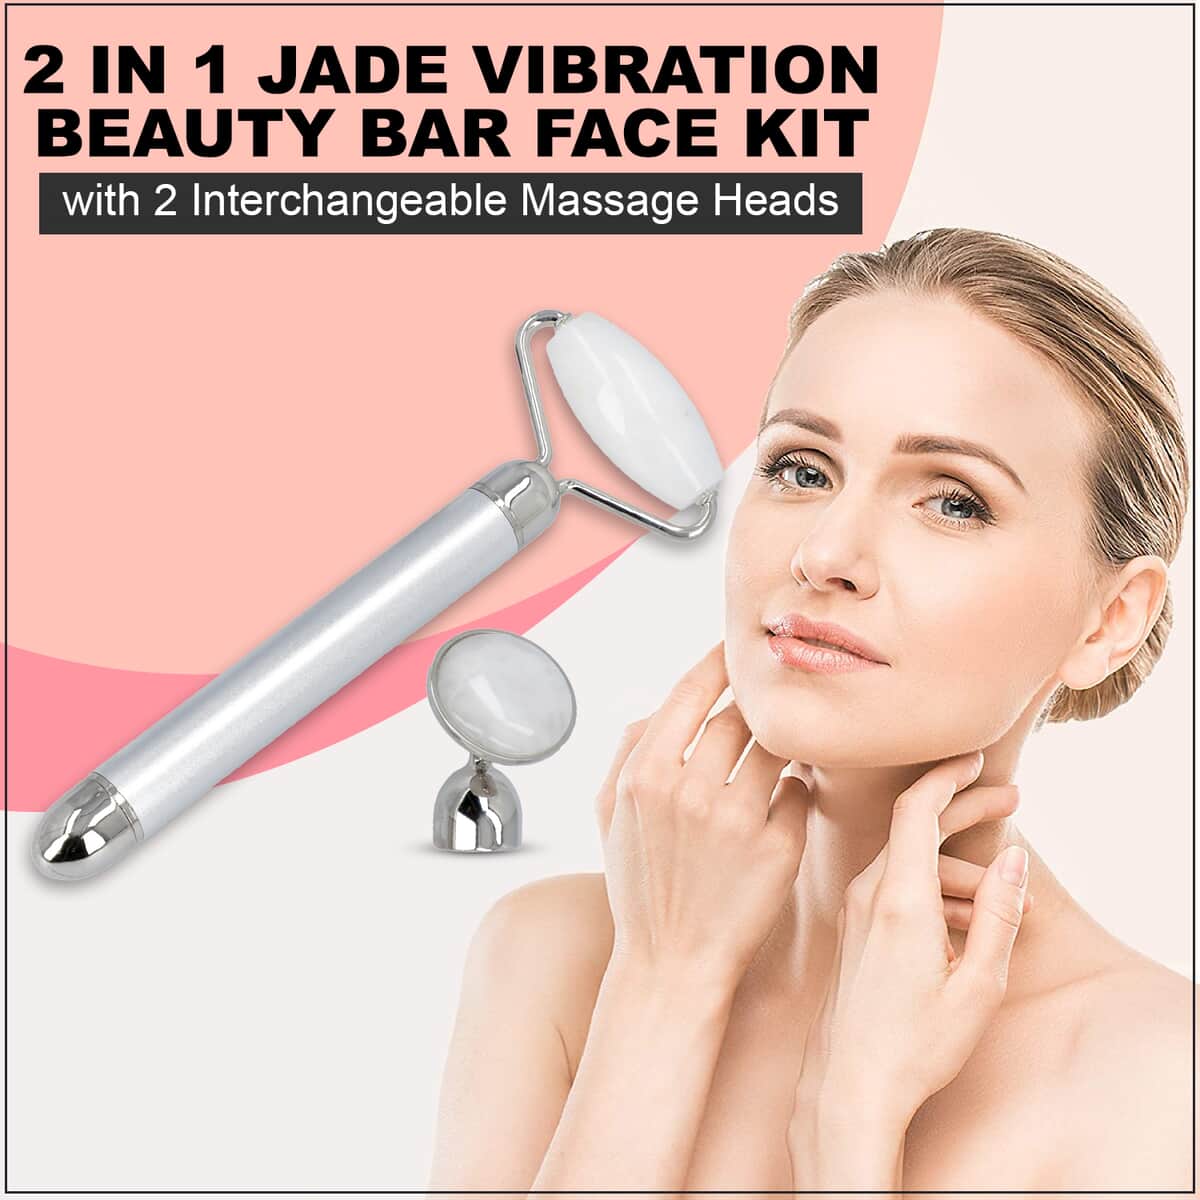 Silver Color 2 in 1 White Jade Vibration Beauty Bar Face Kit with 2 Interchangeable Massage Heads (2xAA Battery Not Included) image number 1